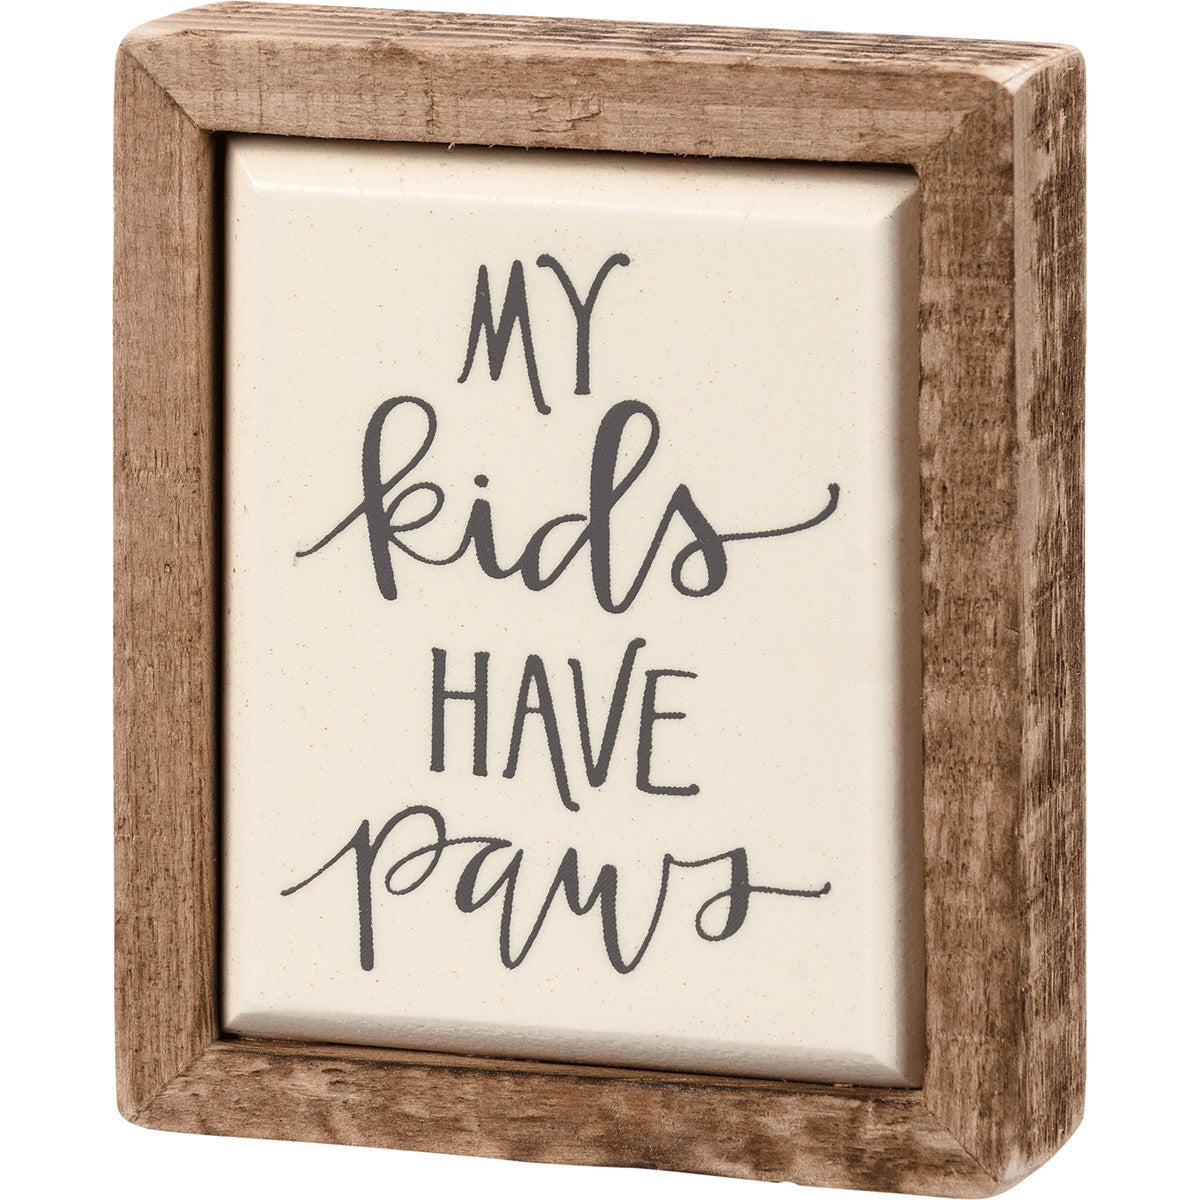 Have Paws Mini Box Sign